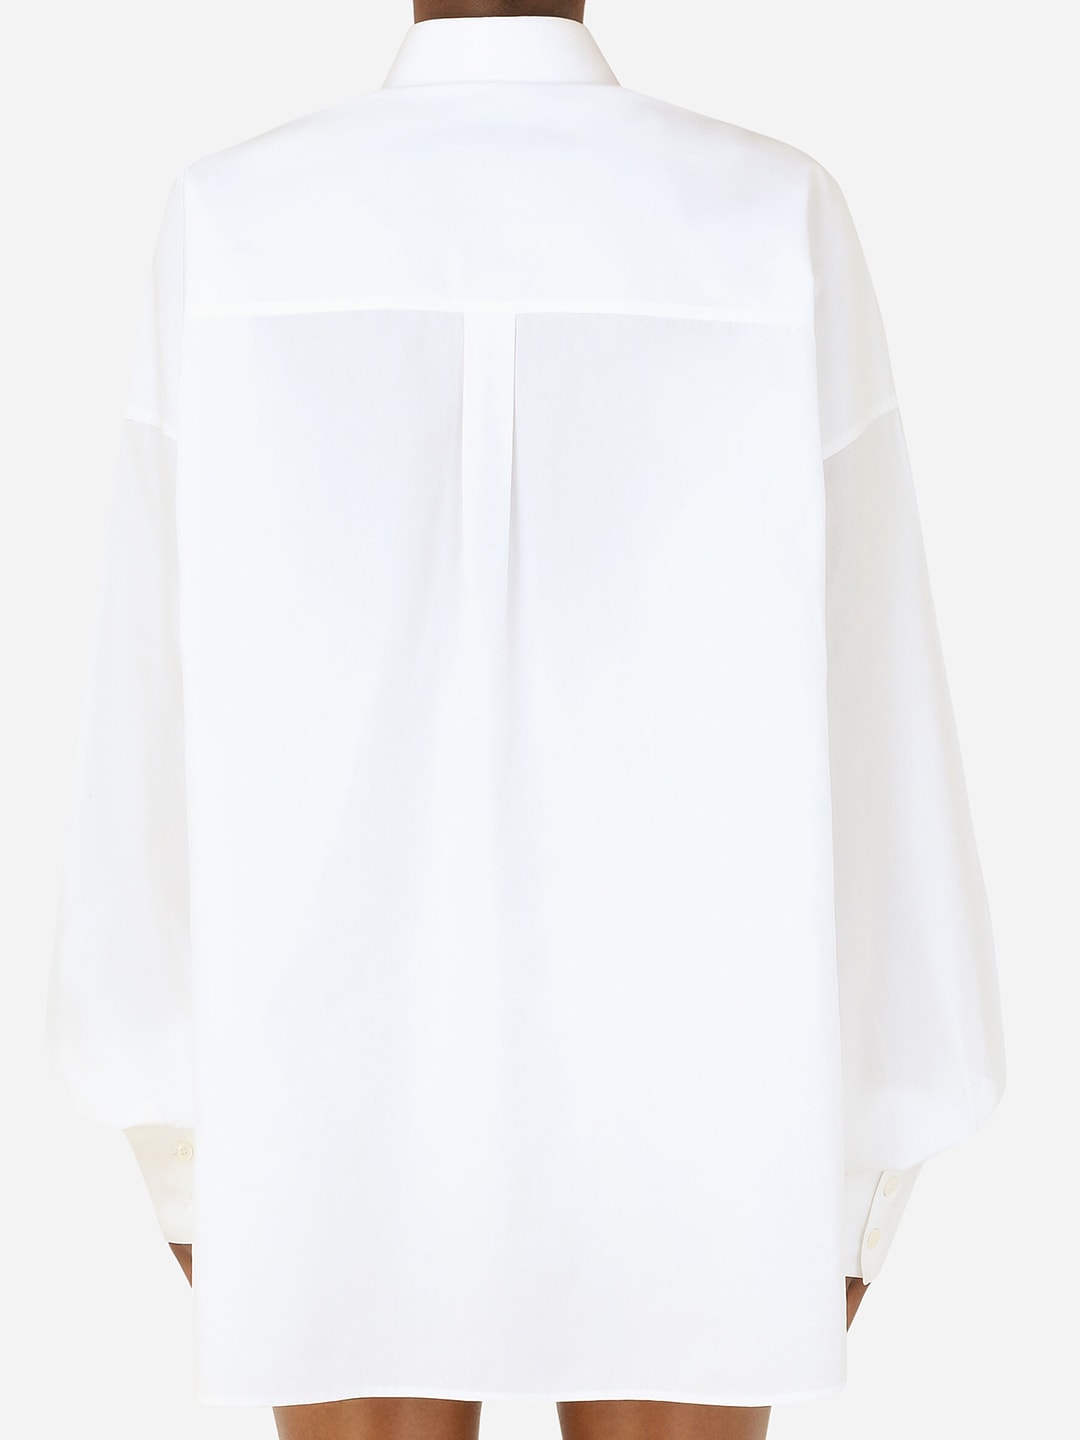 Dolce & Gabbana Broderie Anglaise Detailing Shirt | italist 